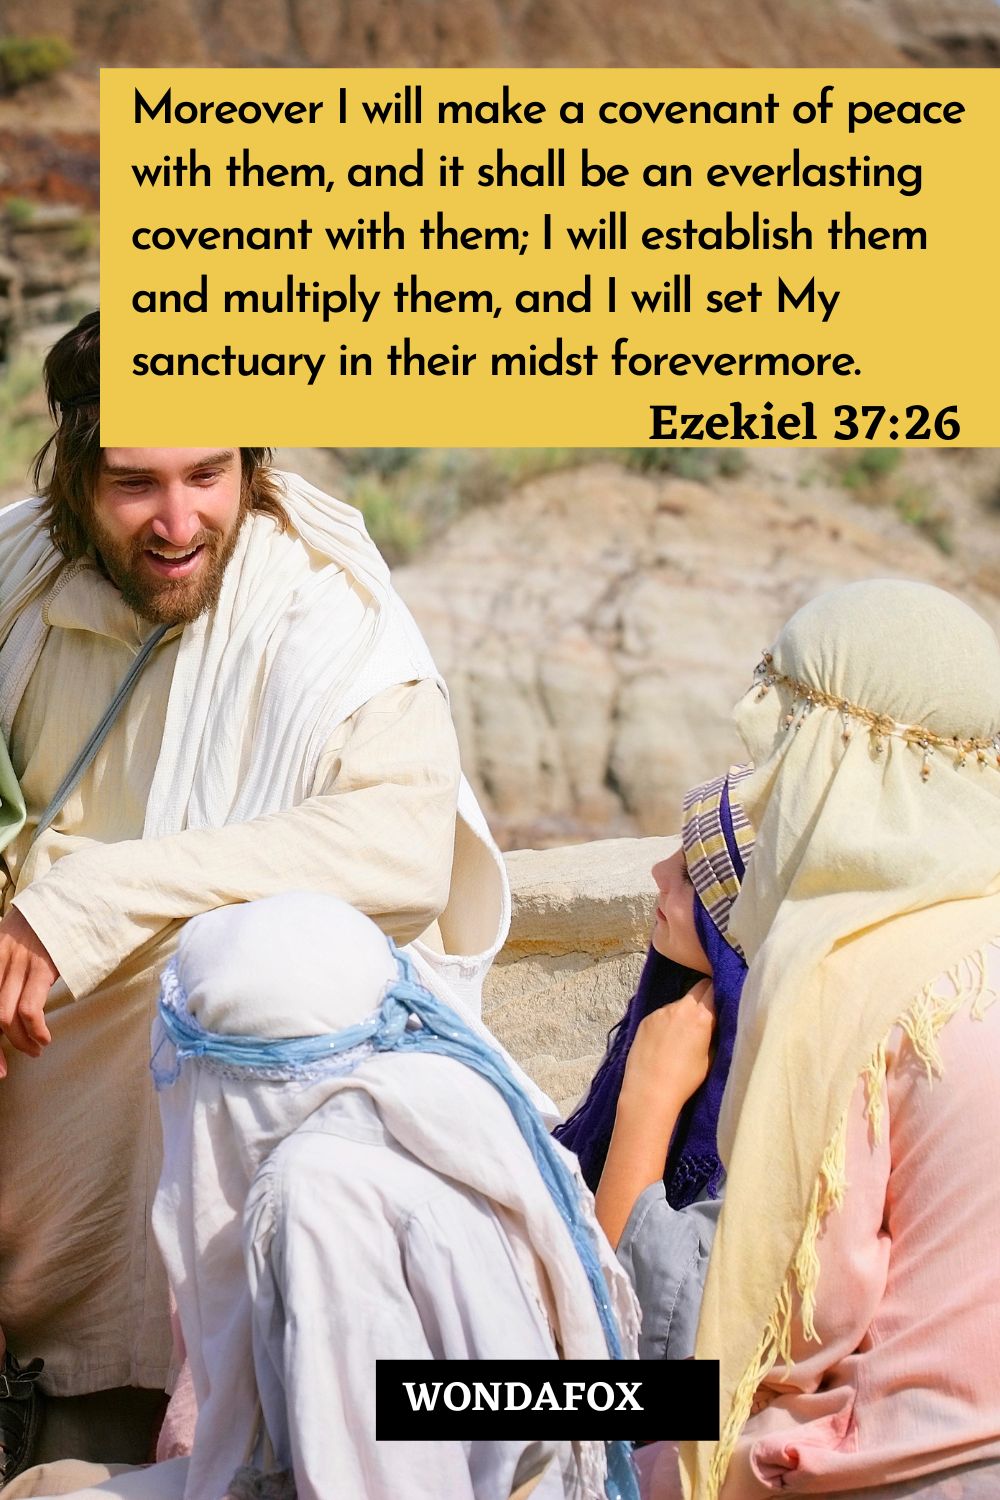 Moreover I will make a covenant of peace with them, and it shall be an everlasting covenant with them; I will establish them and multiply them, and I will set My sanctuary in their midst forevermore.
Ezekiel 37:26